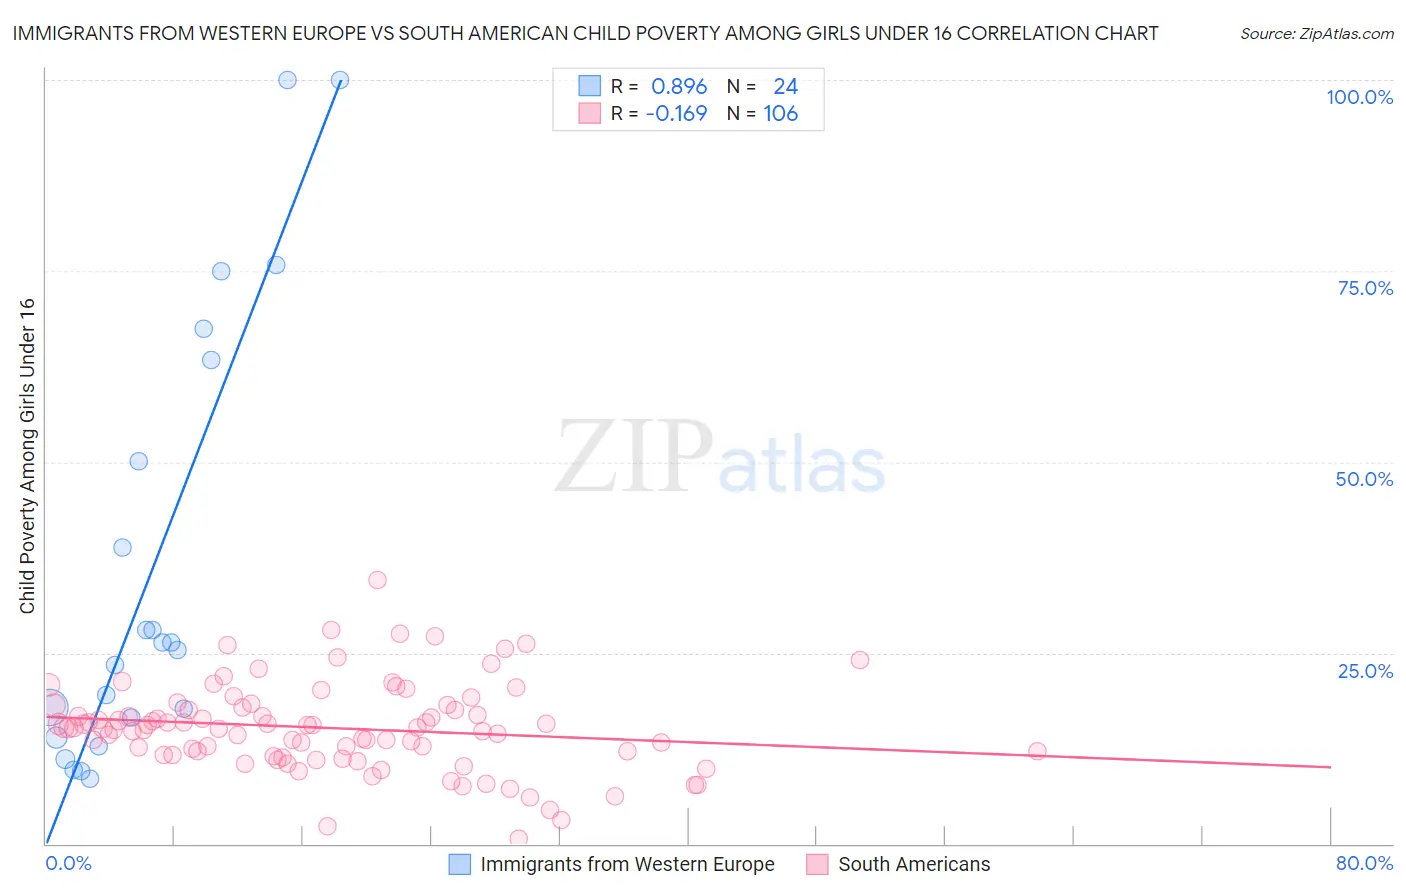 Immigrants from Western Europe vs South American Child Poverty Among Girls Under 16